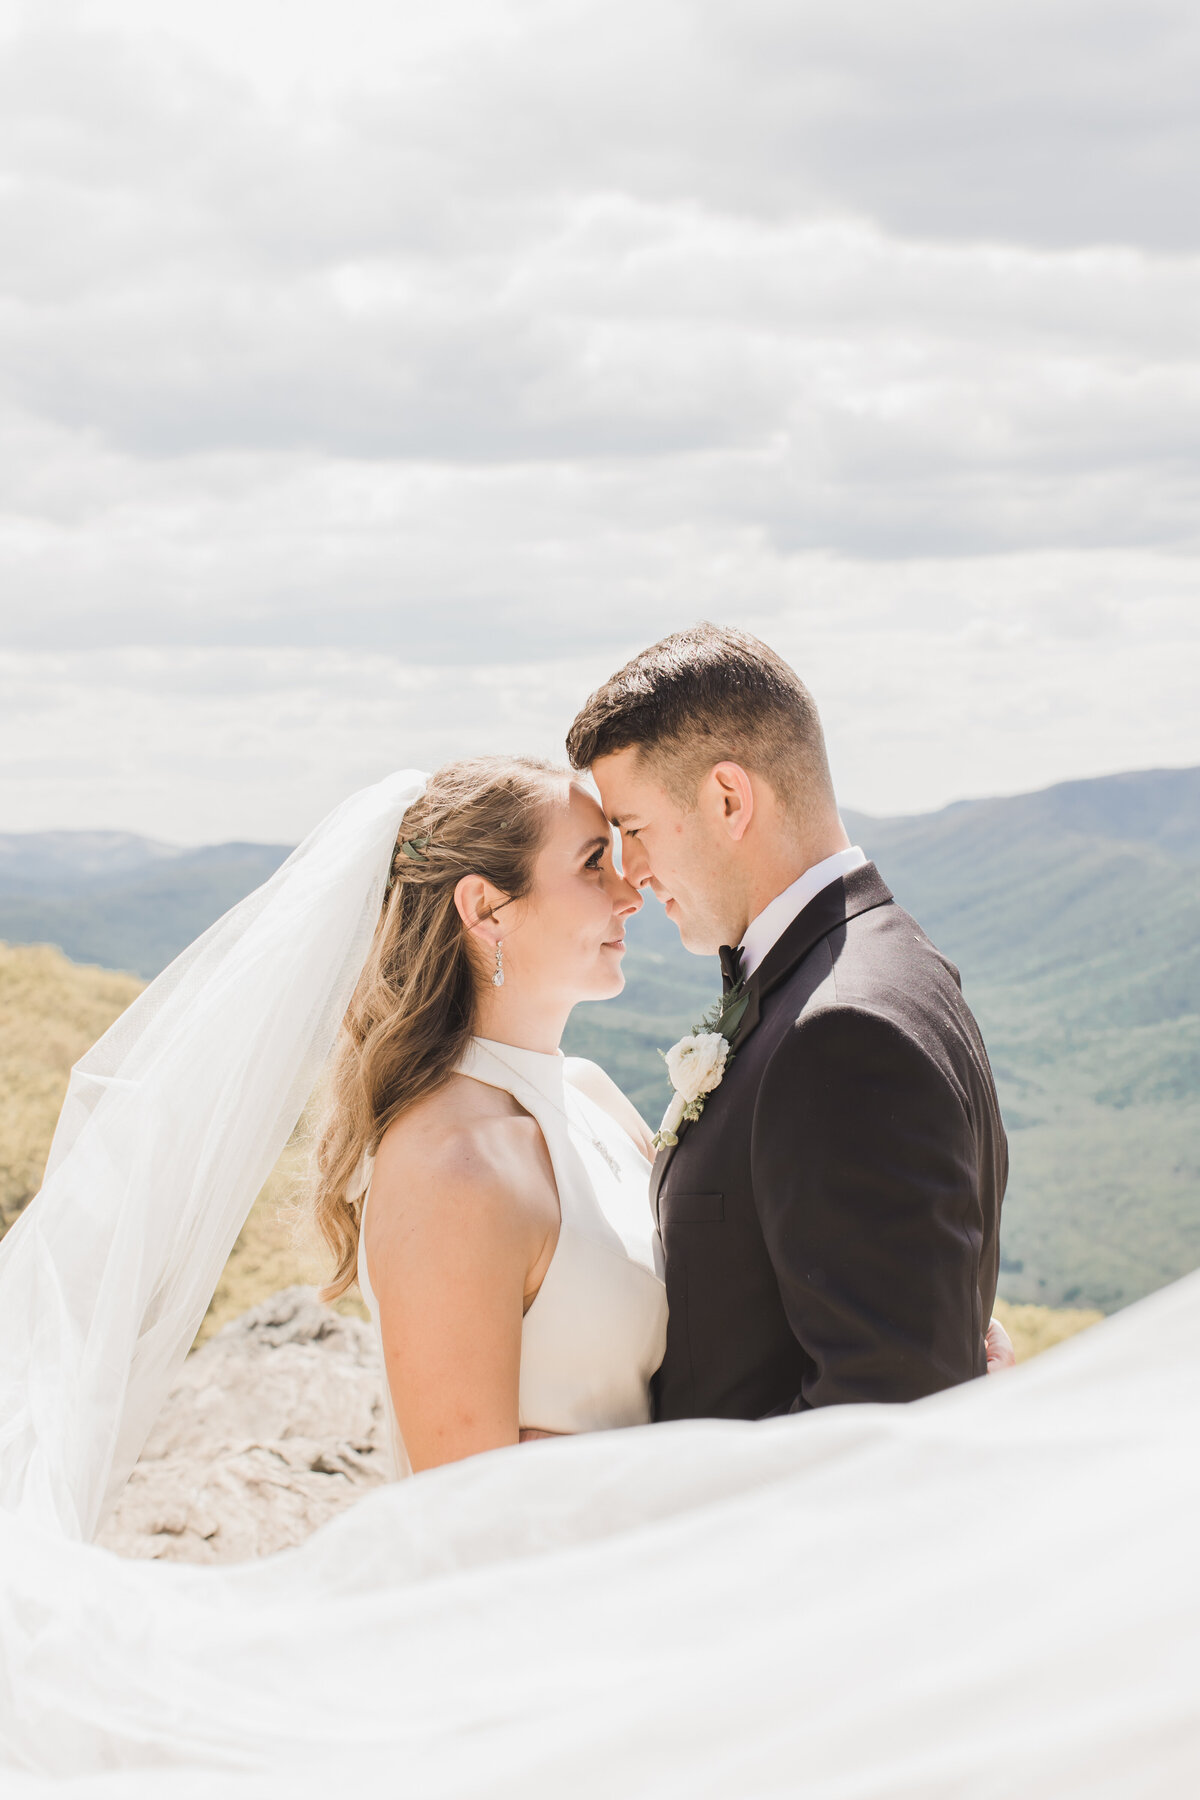 Wedding Photographer & Elopement Photographer, couple standing forehead to forehead